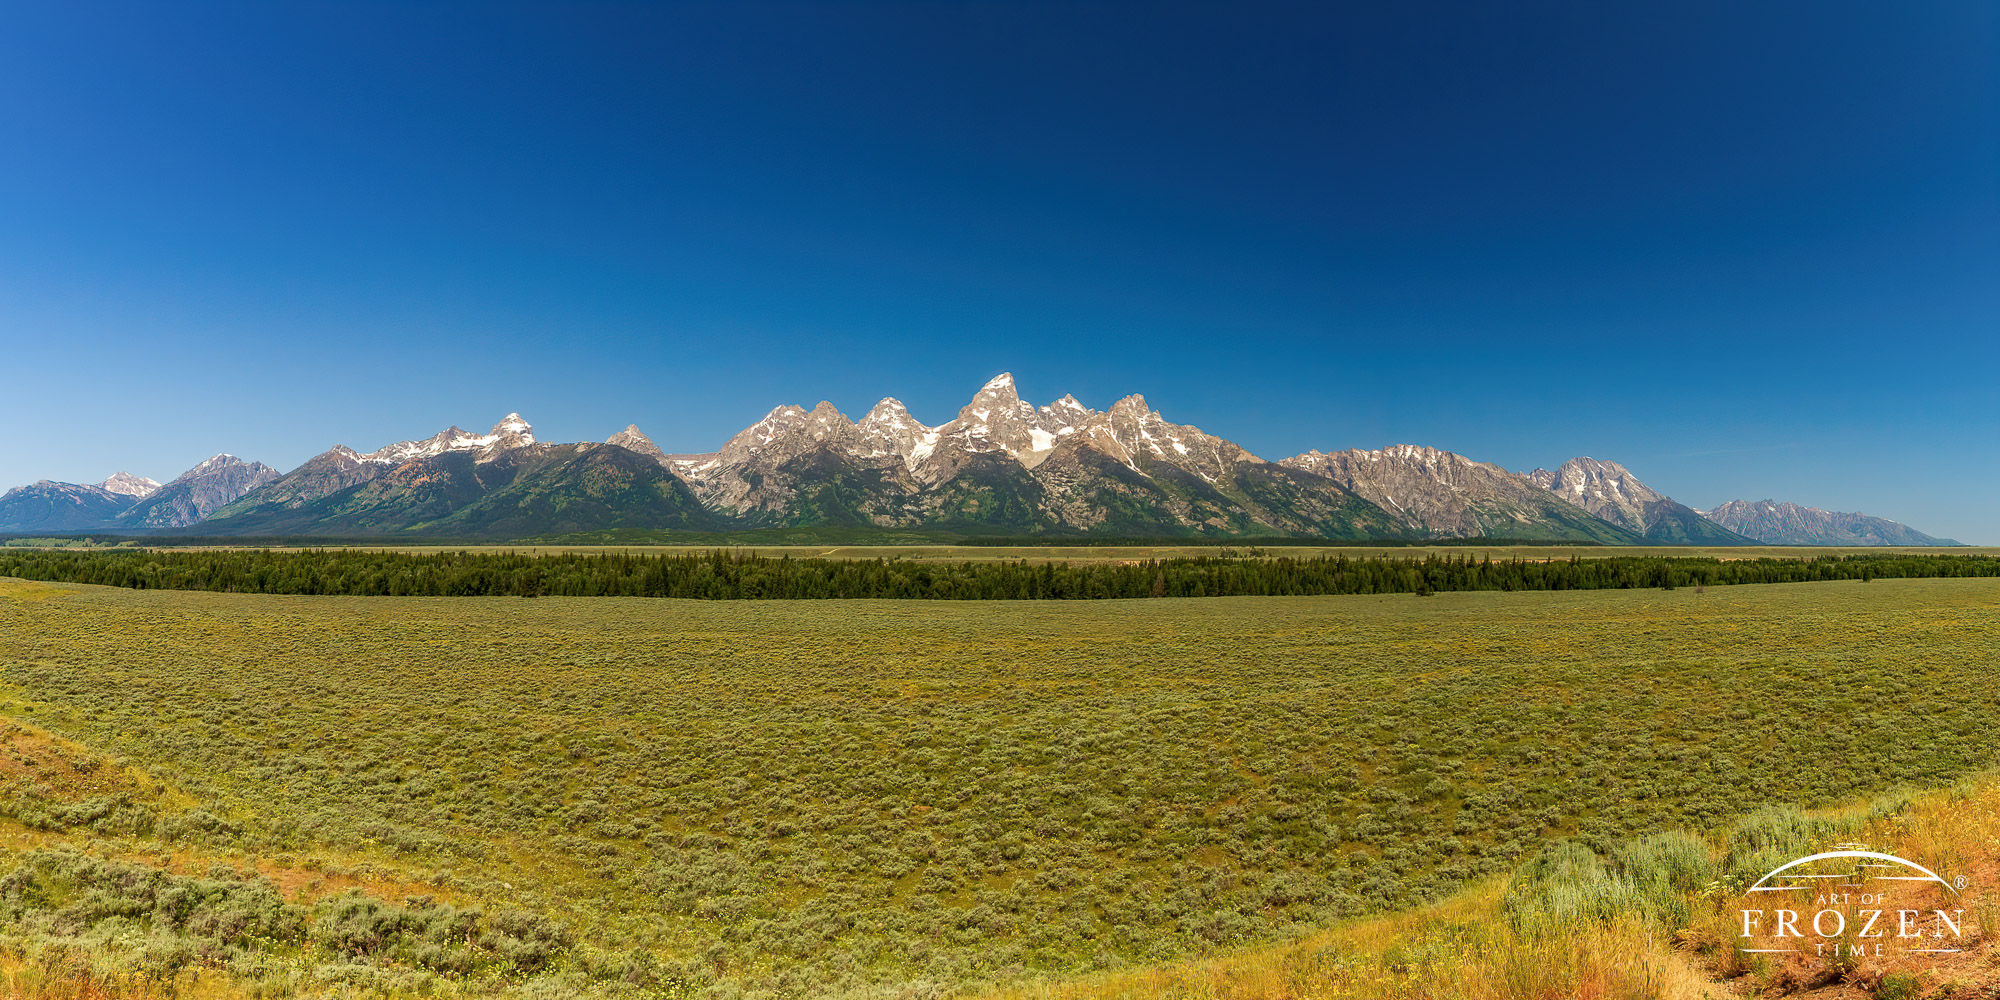 A panorama of the Grand Tetons and their glaciers while a sagebrush plain and the Snake River fill the foreground